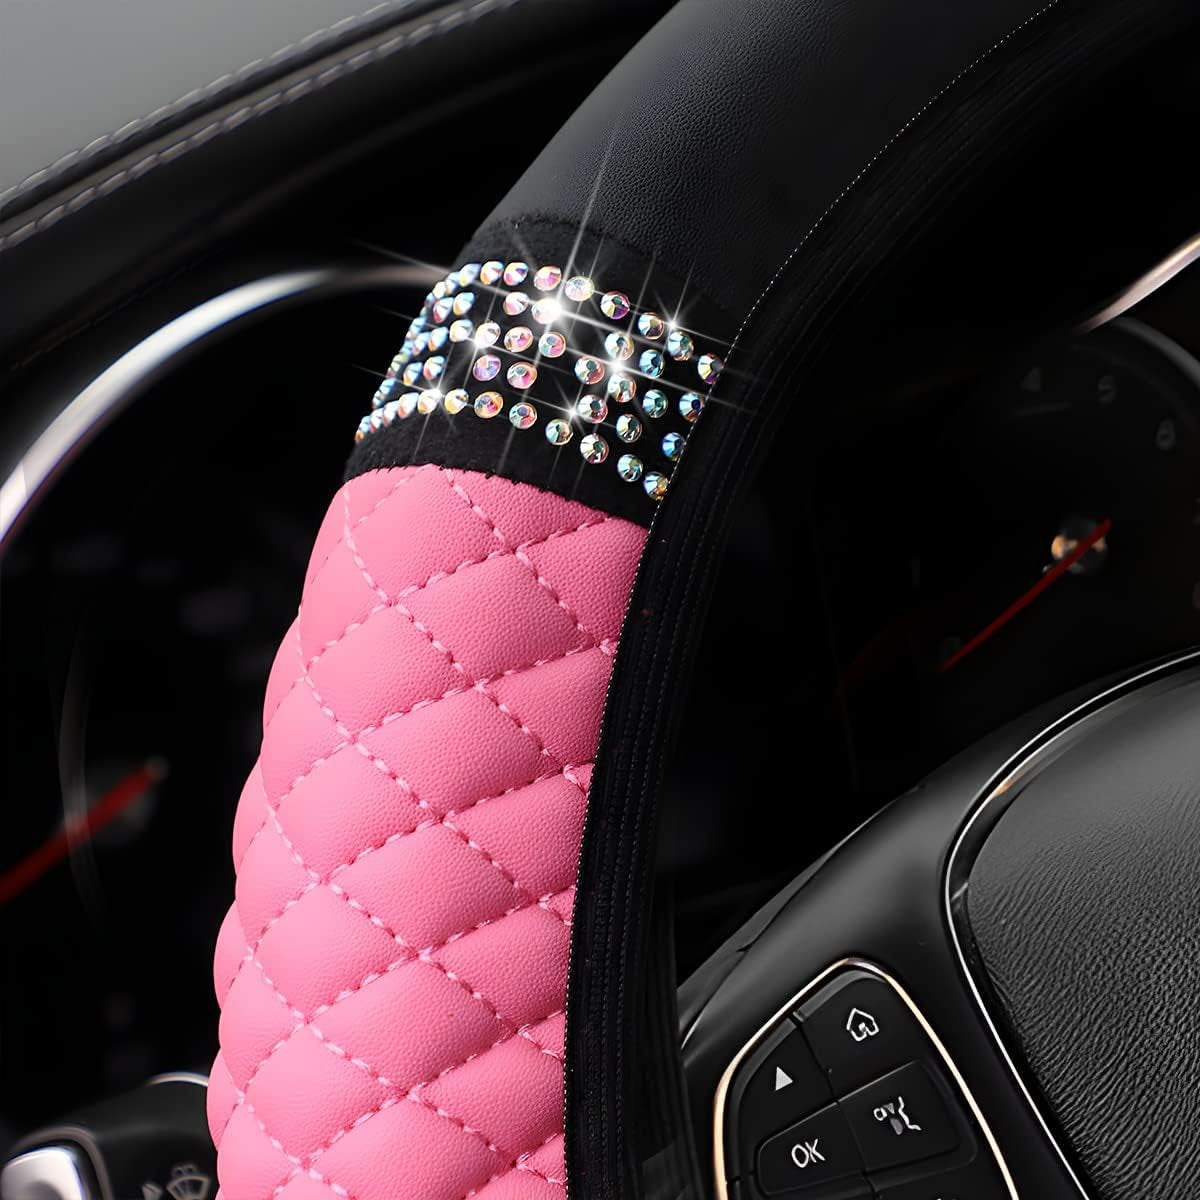 Bling Soft Leather Steering Wheel Cover, Colorful Rhinestones Auto Elastic Steering Wheel Protector, Sparkly Crystal Diamond for Women Girls, Car Interior Accessories for Most Cars (Pink)